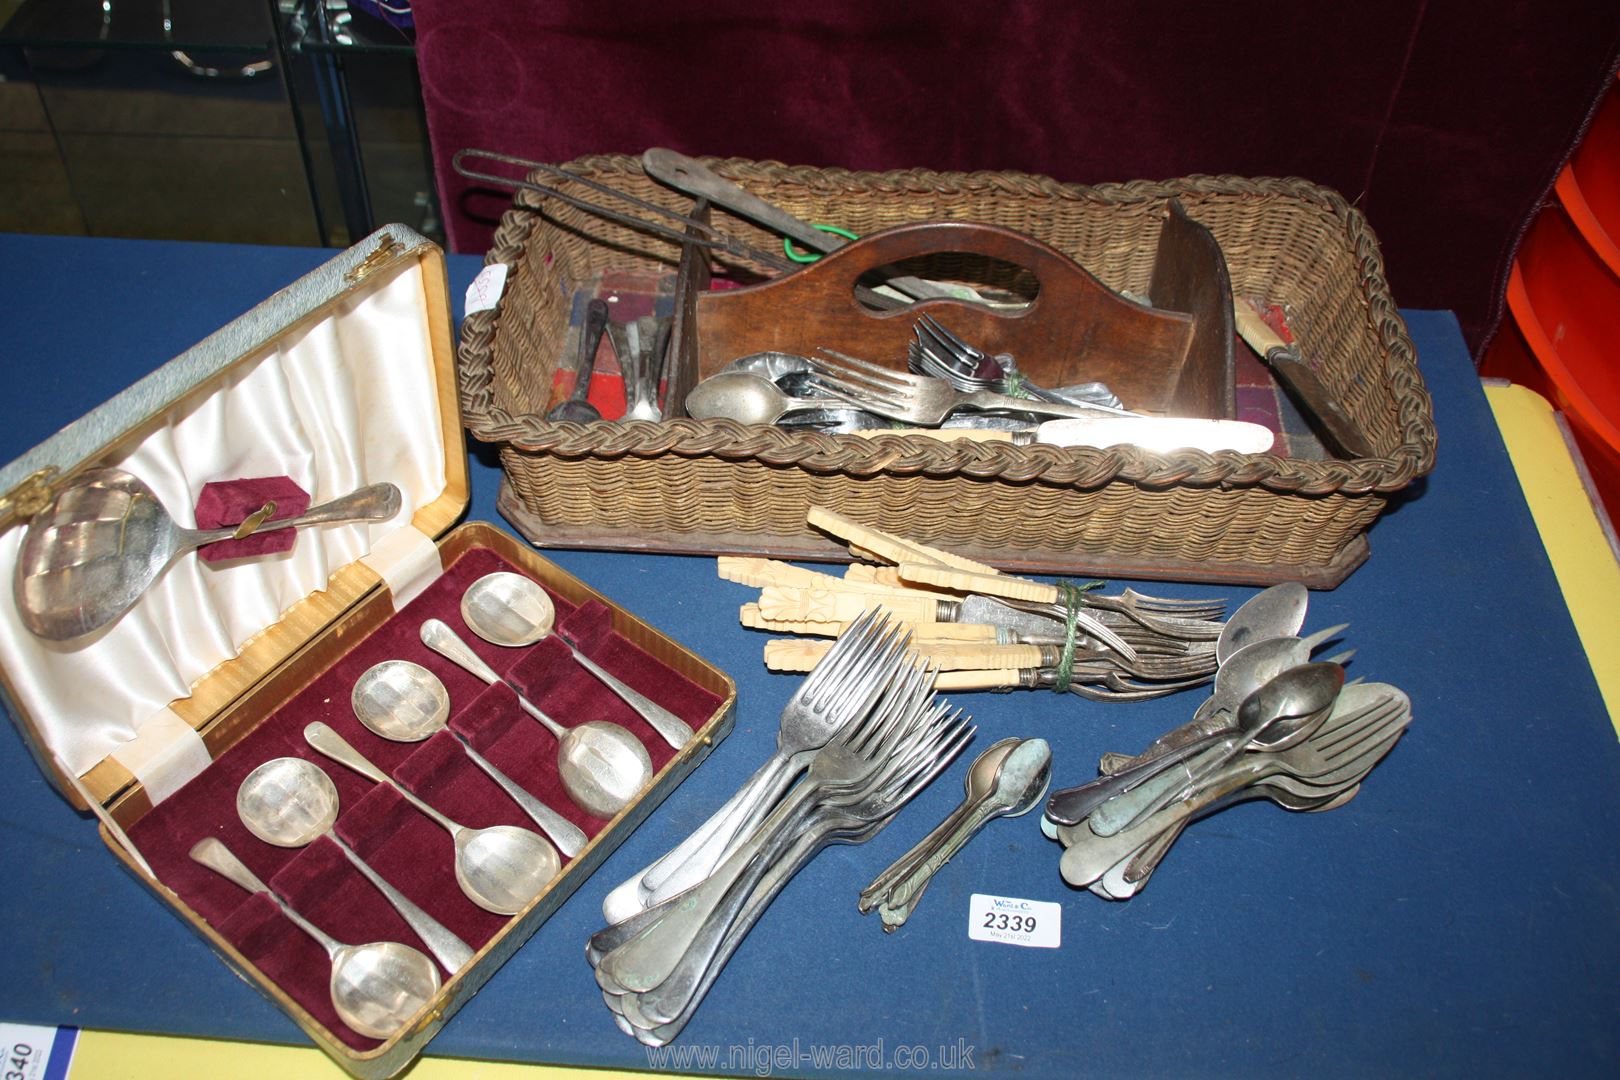 A wicker cutlery tray with assorted bone handled cutlery, spoons, forks and a boxed dessert set.